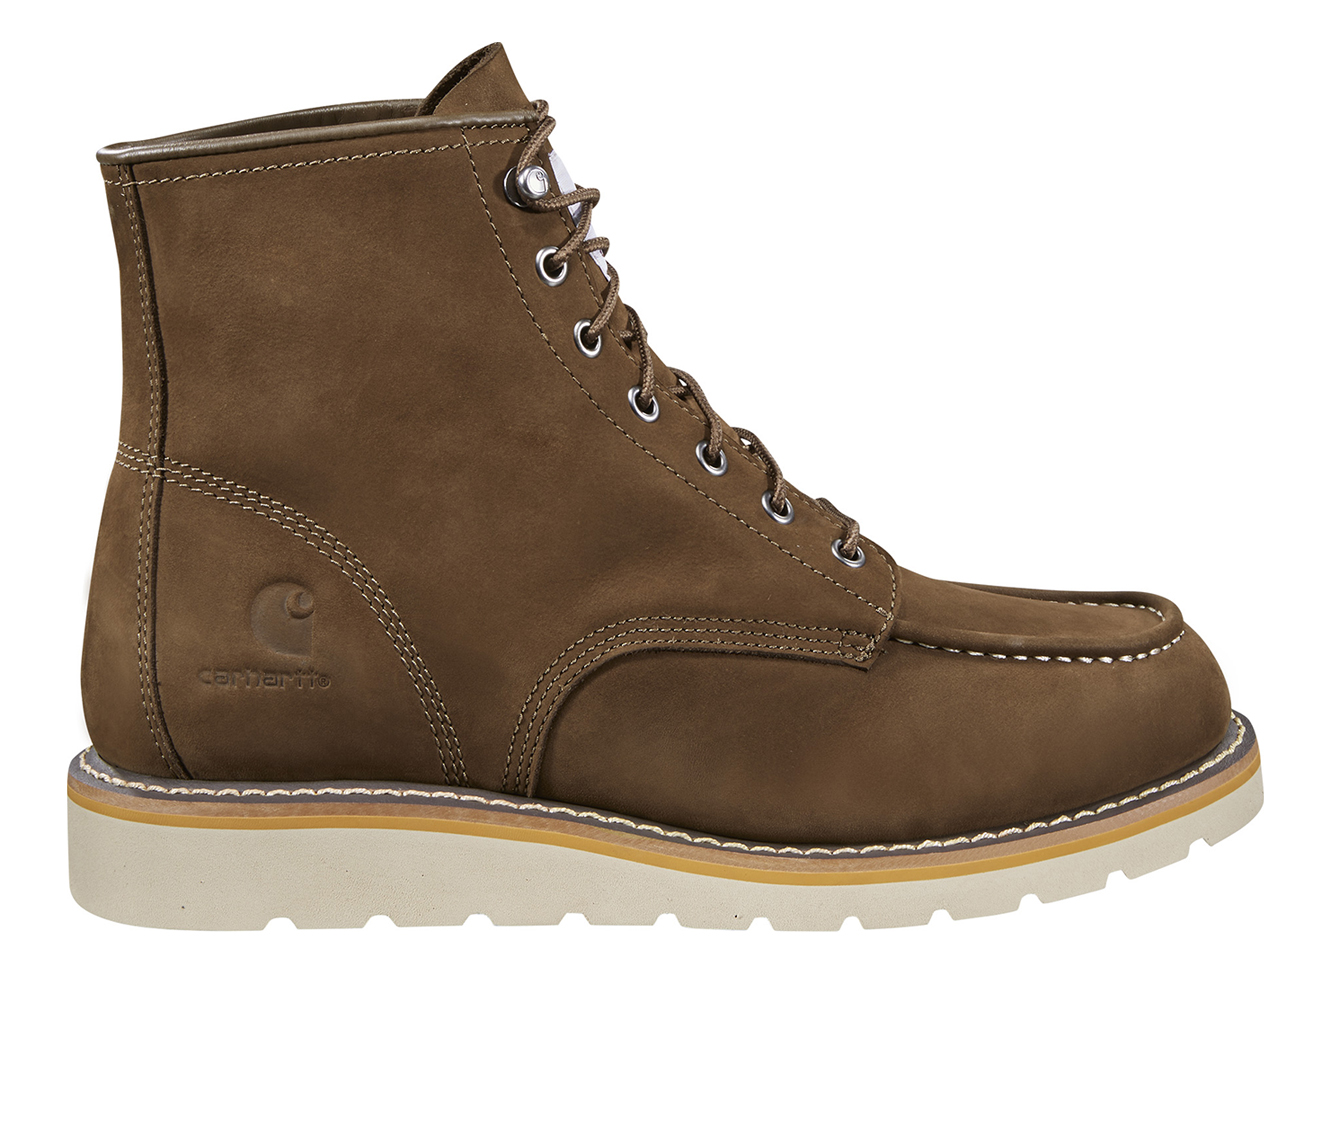 Carhartt Work Boots & Shoes | Shoe Carnival